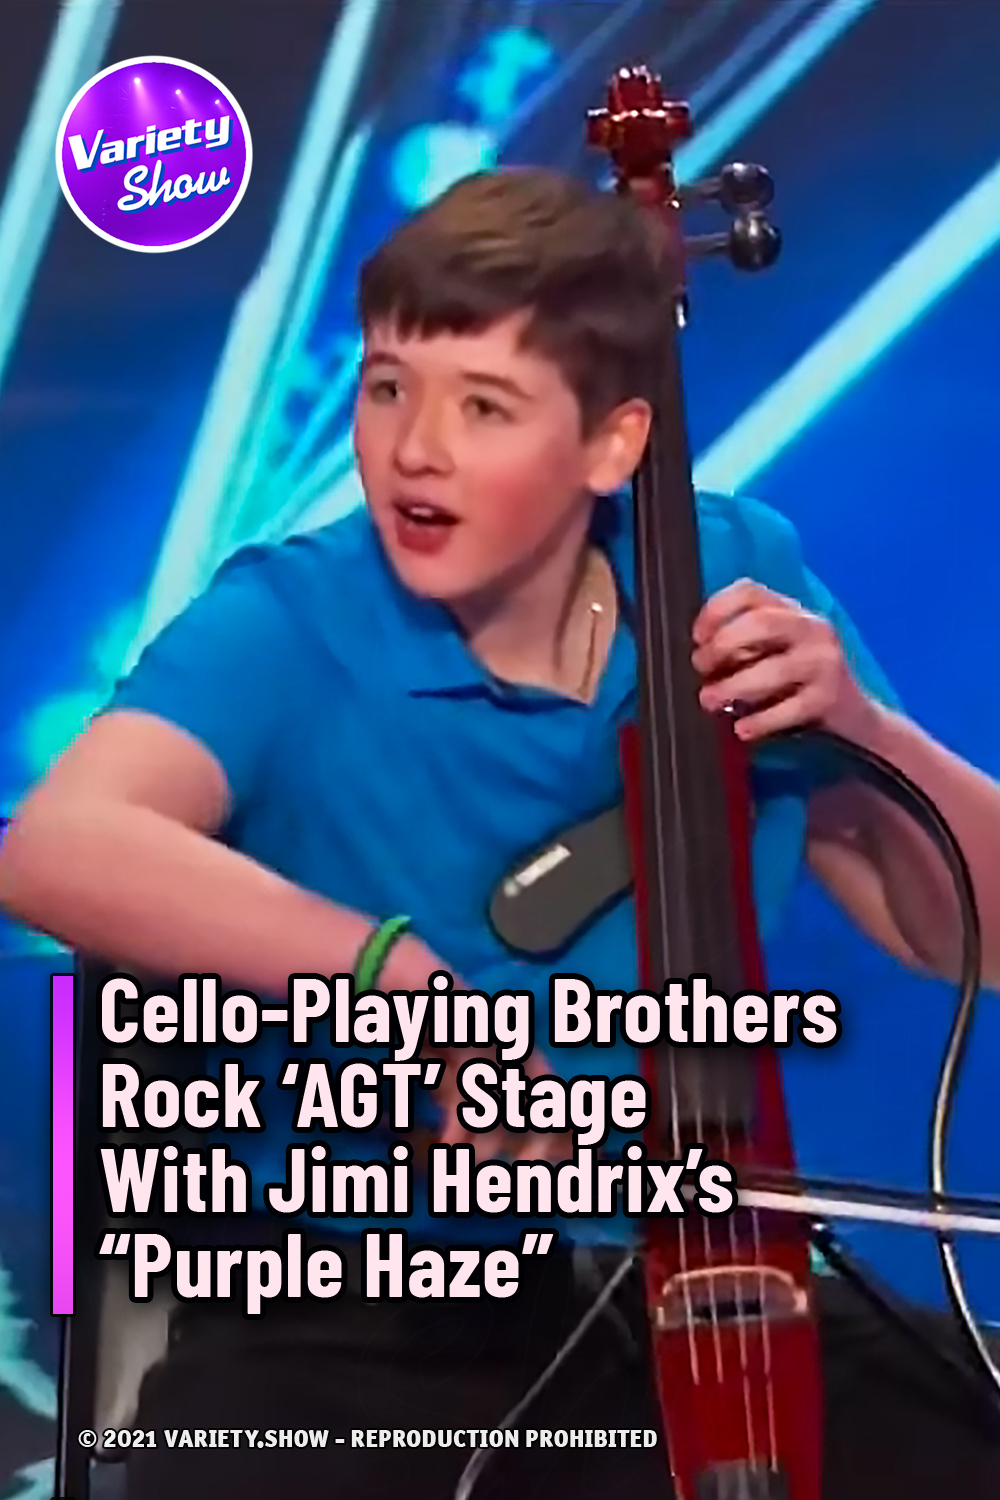 Cello-Playing Brothers Rock ‘AGT’ Stage With Jimi Hendrix’s “Purple Haze”